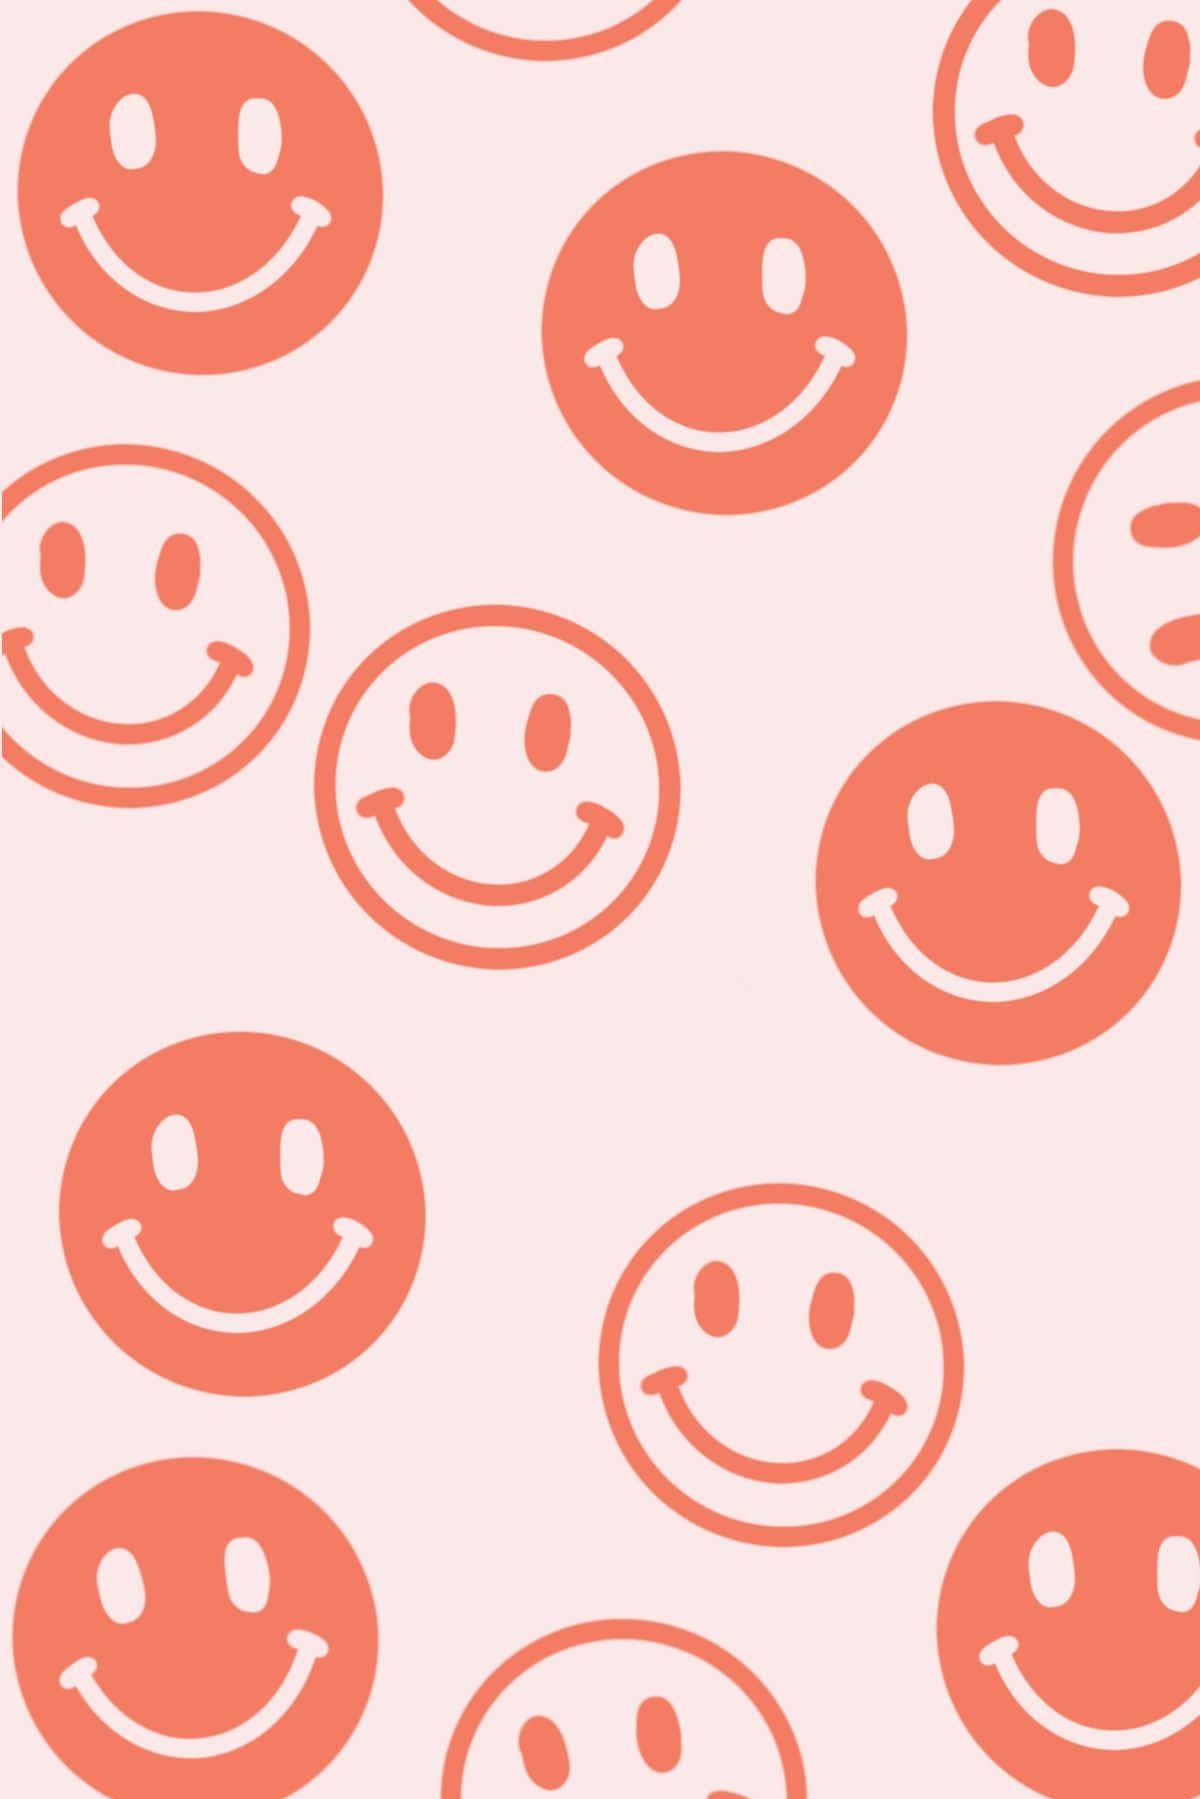 Download Cute Pink Happy Smile Face Wallpaper